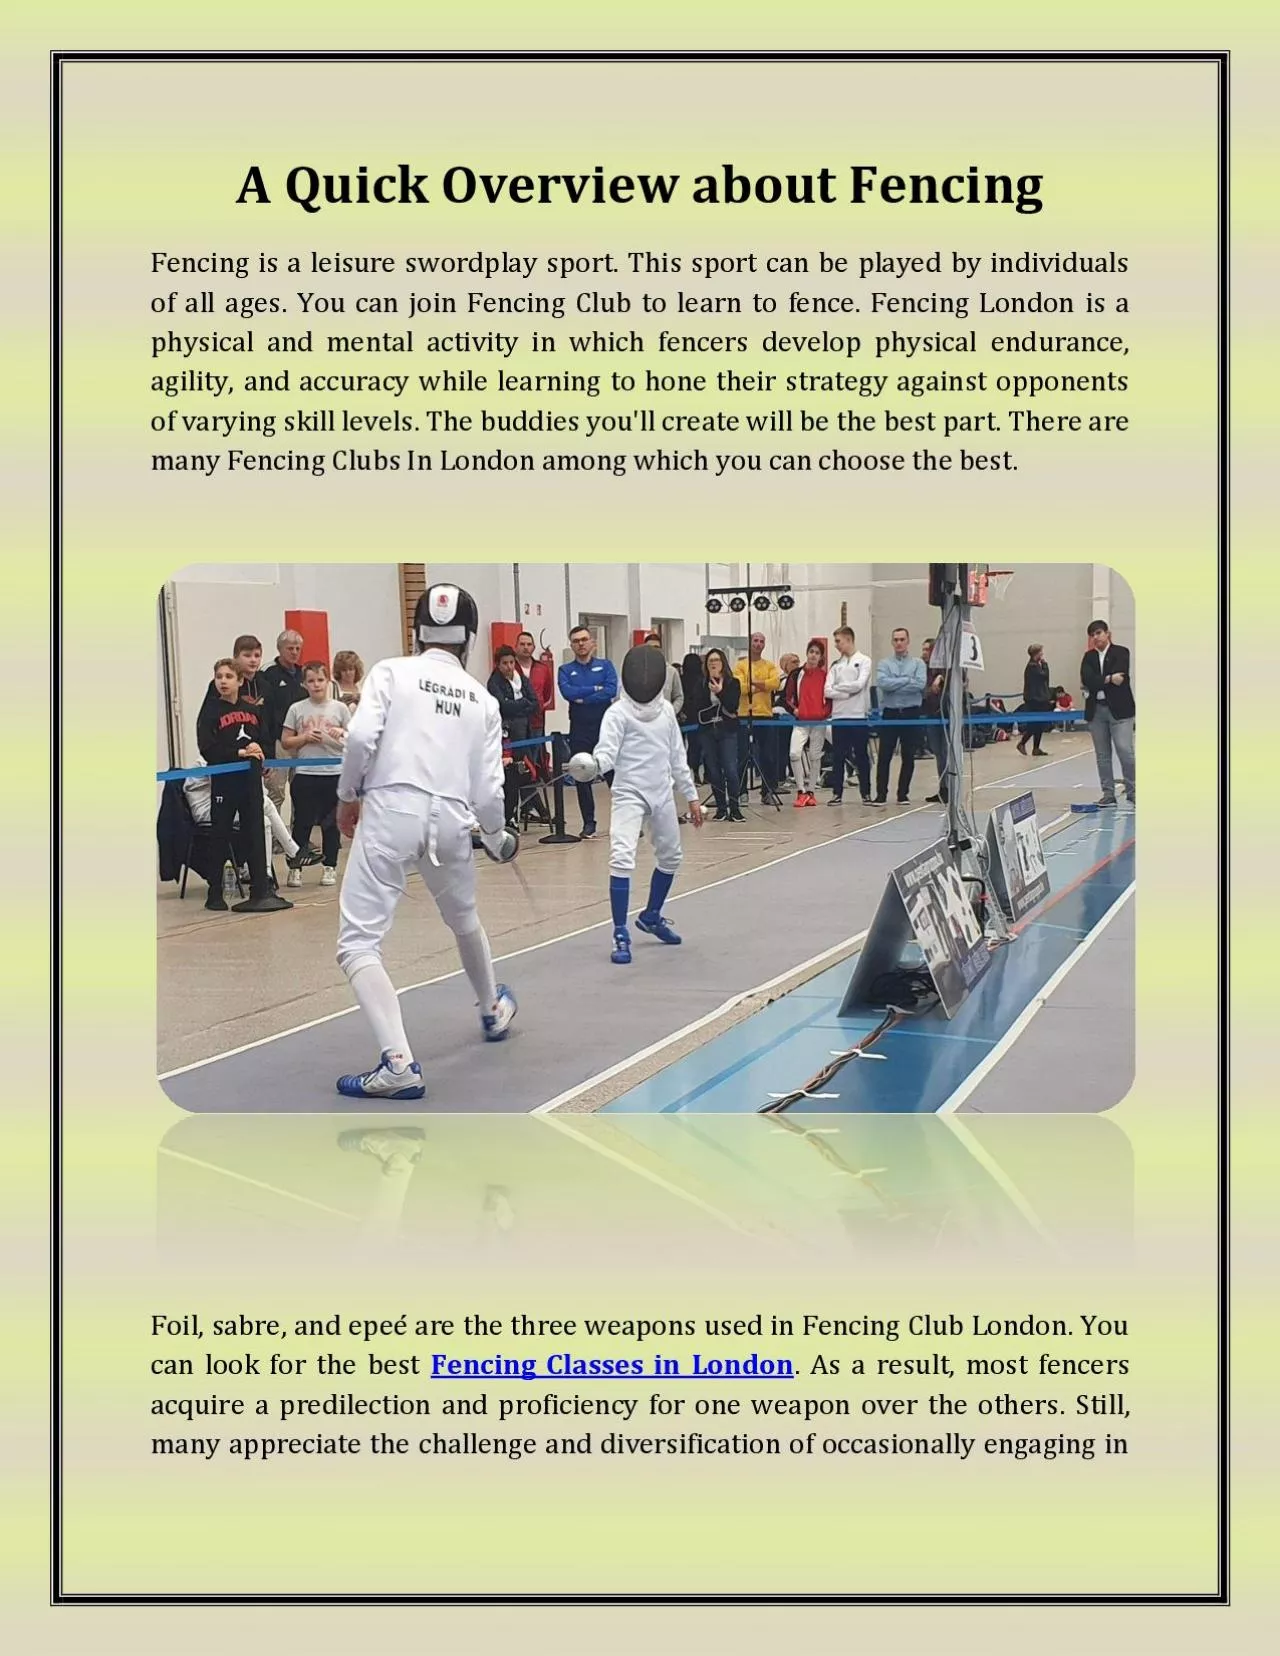 A Quick Overview about Fencing